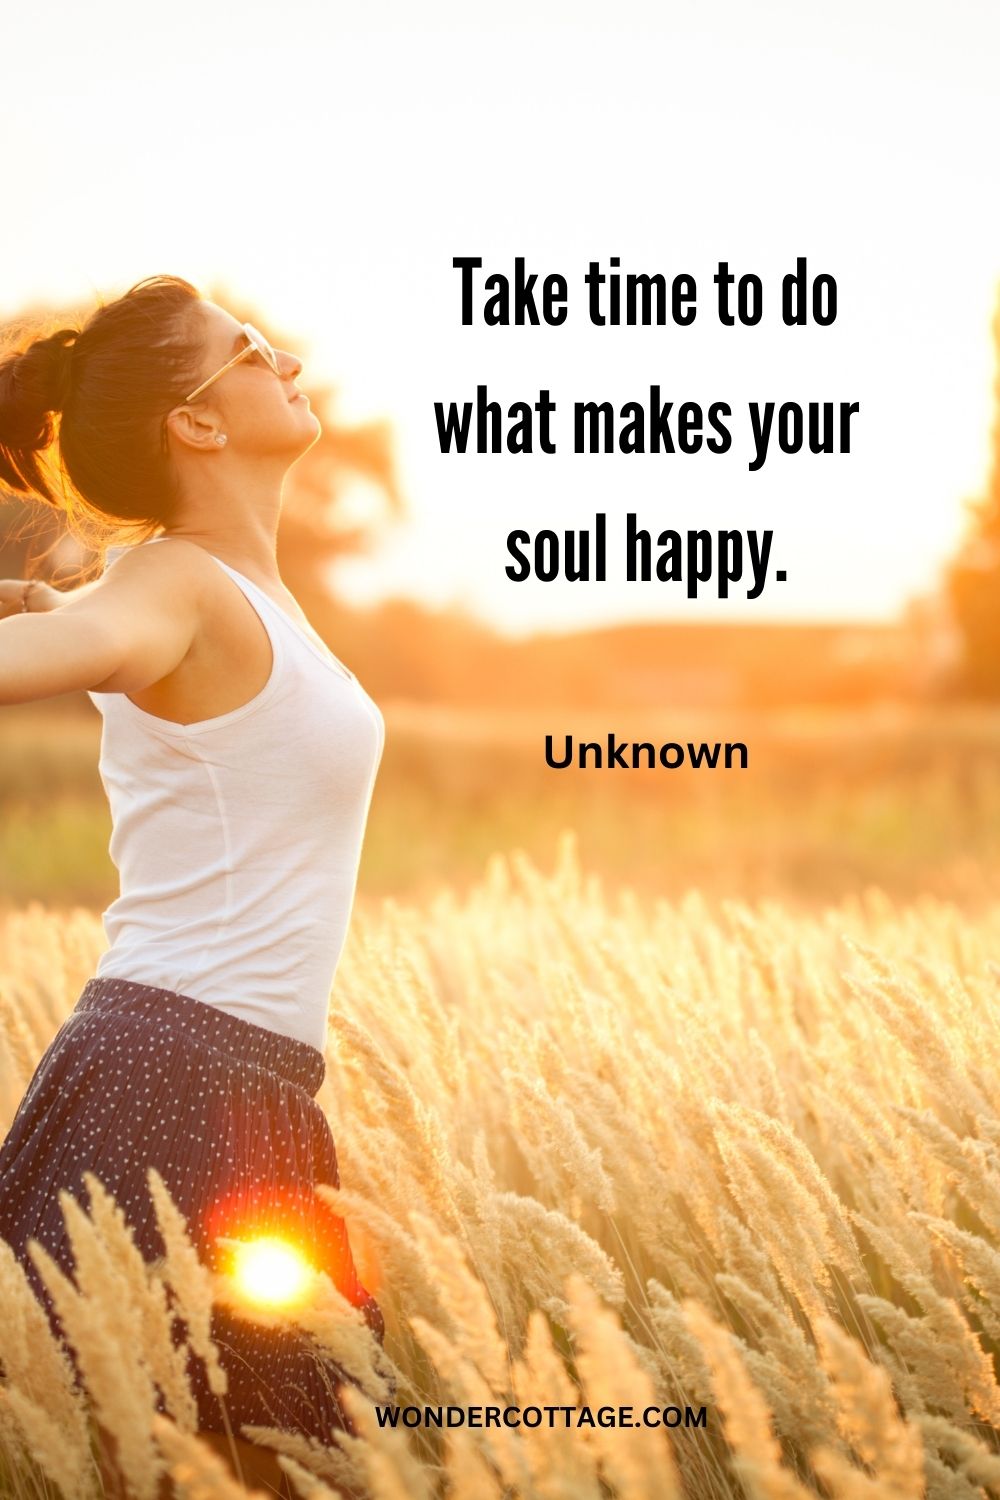 Take time to do what makes your soul happy. Unknown